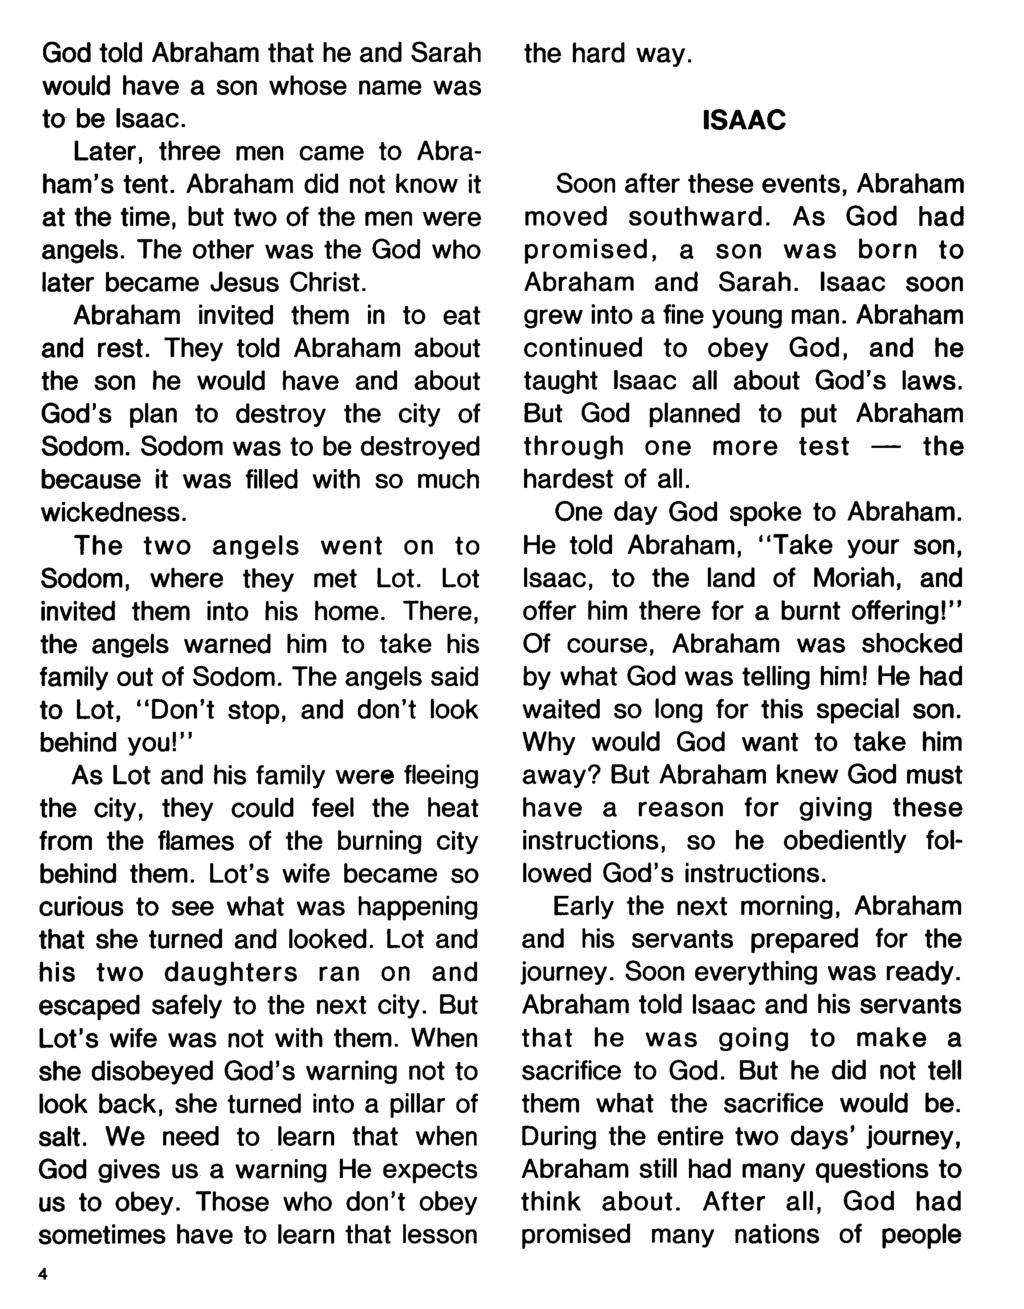 God told Abraham that he and Sarah would have a son whose name was to be Isaac. Later, three men came to Abraham's tent. Abraham did not know it at the time, but two of the men were angels.